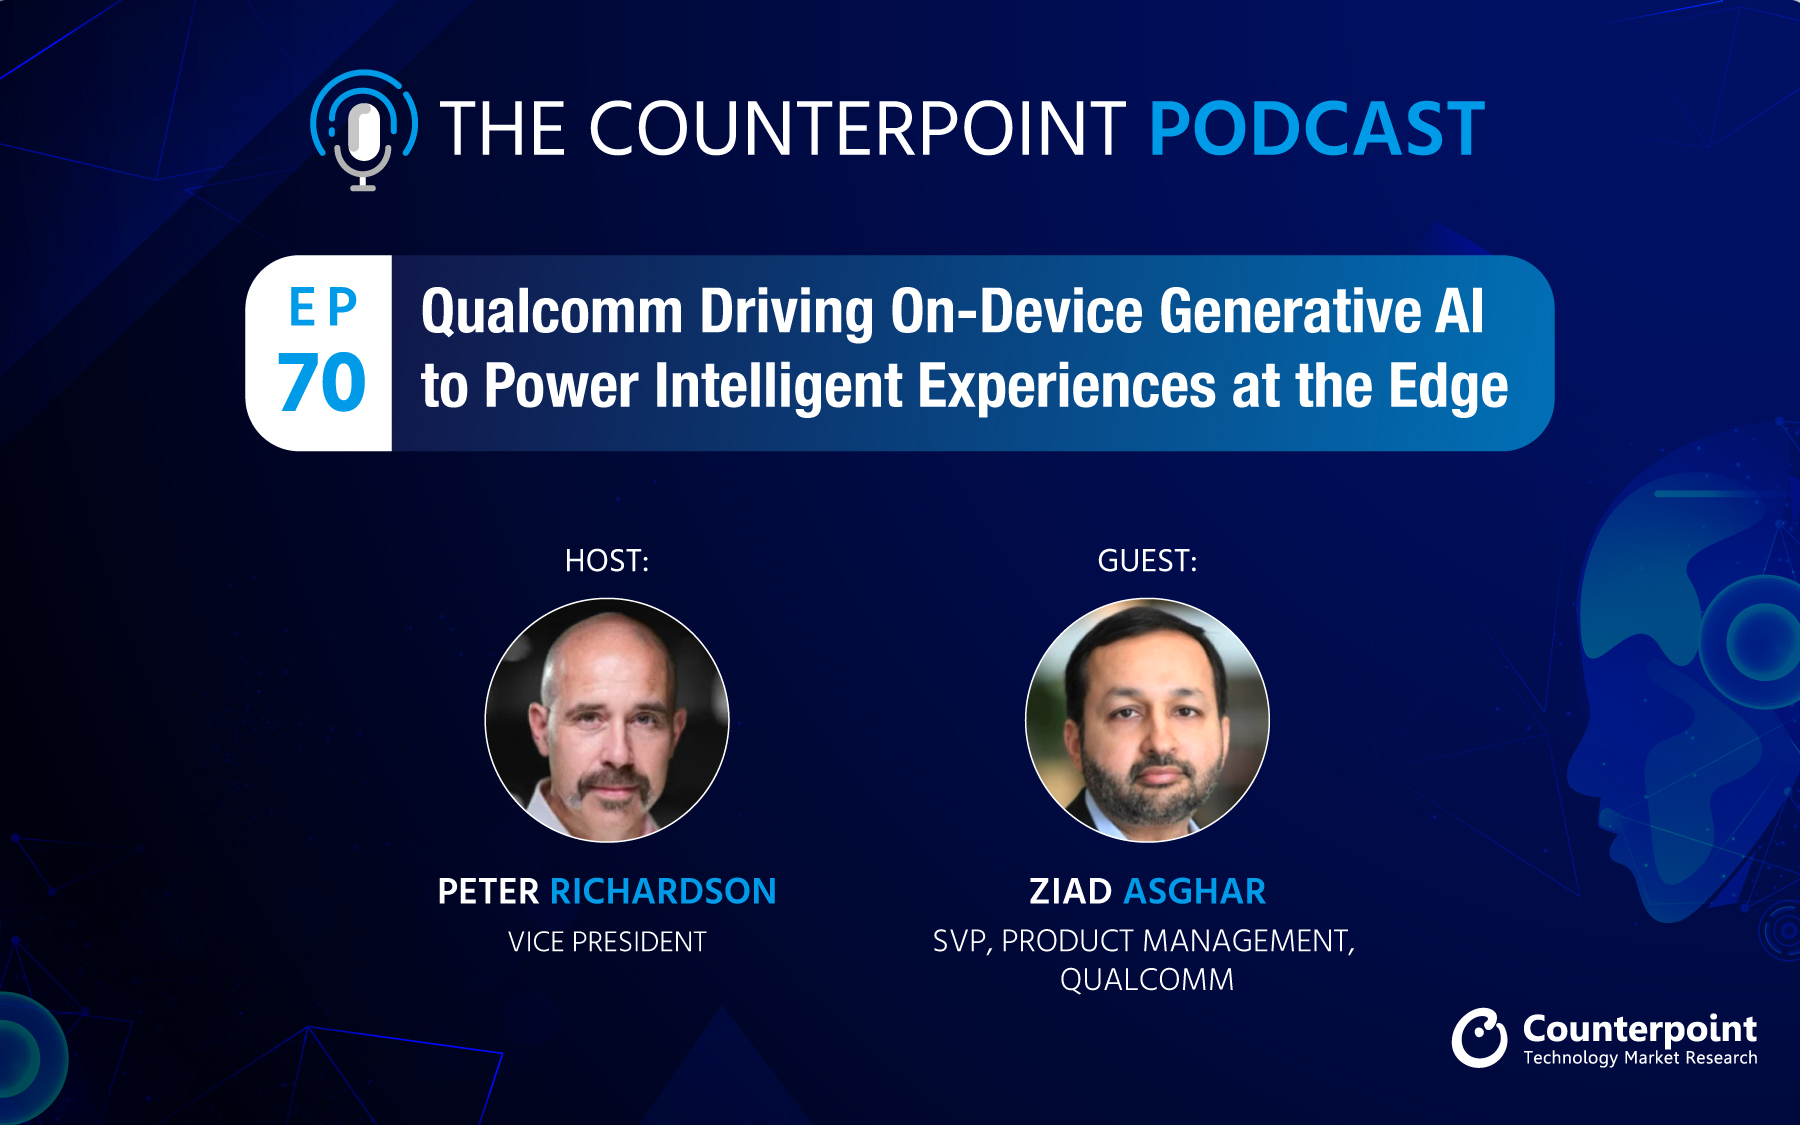 Podcast #70: Qualcomm Driving On-device Generative AI to Power Intelligent Experiences at the Edge